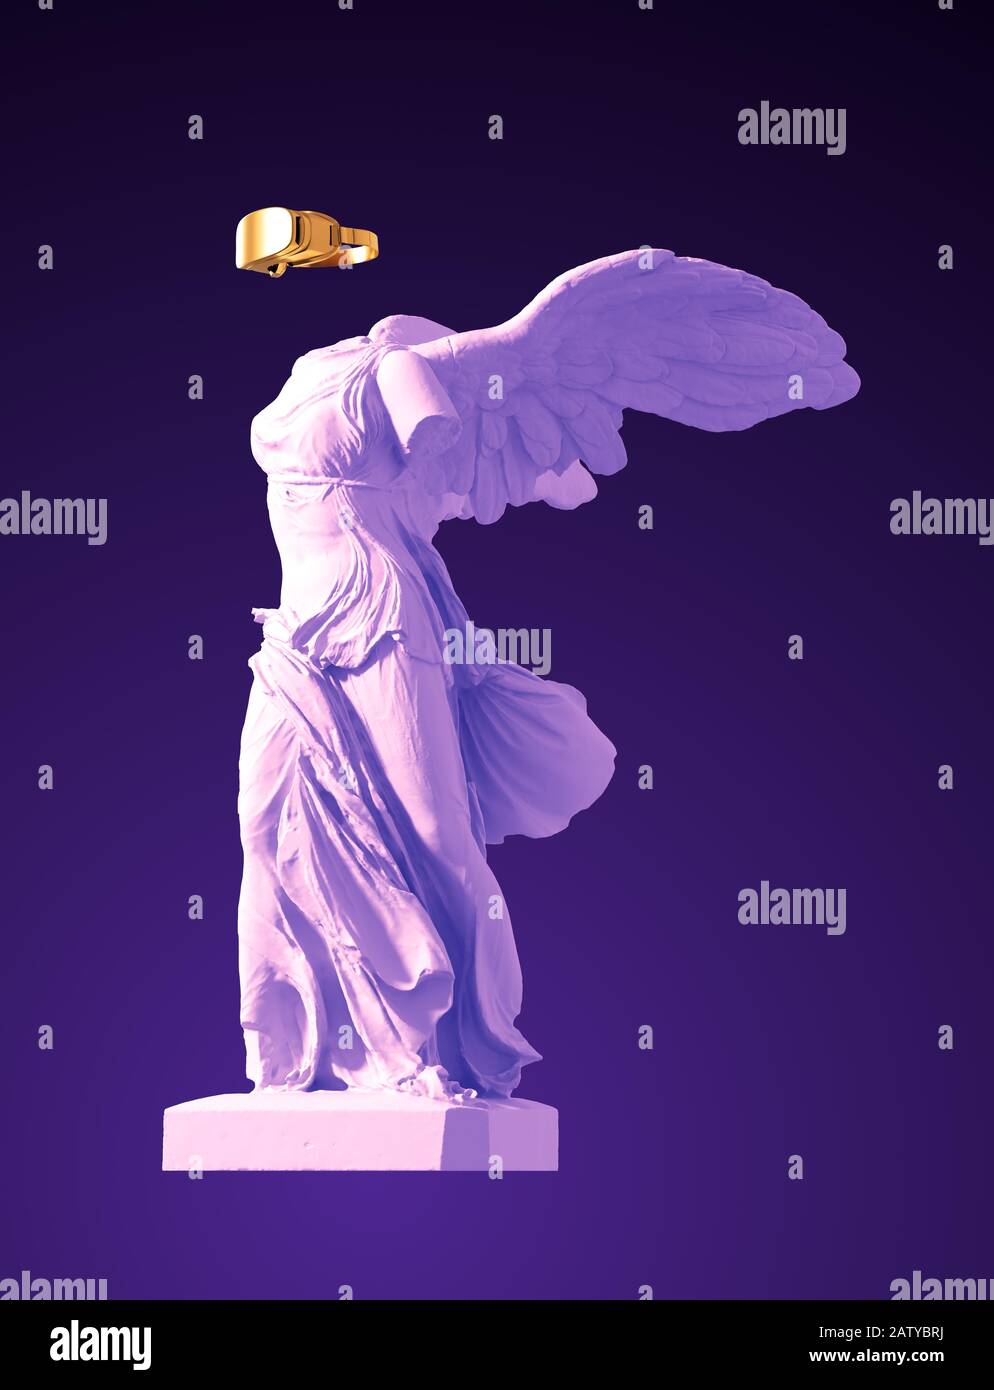 3D Model Of Winged Victory With Golden VR Glasses On Purple Background. Concept Of Art Inside Virtual Reality. Stock Photo